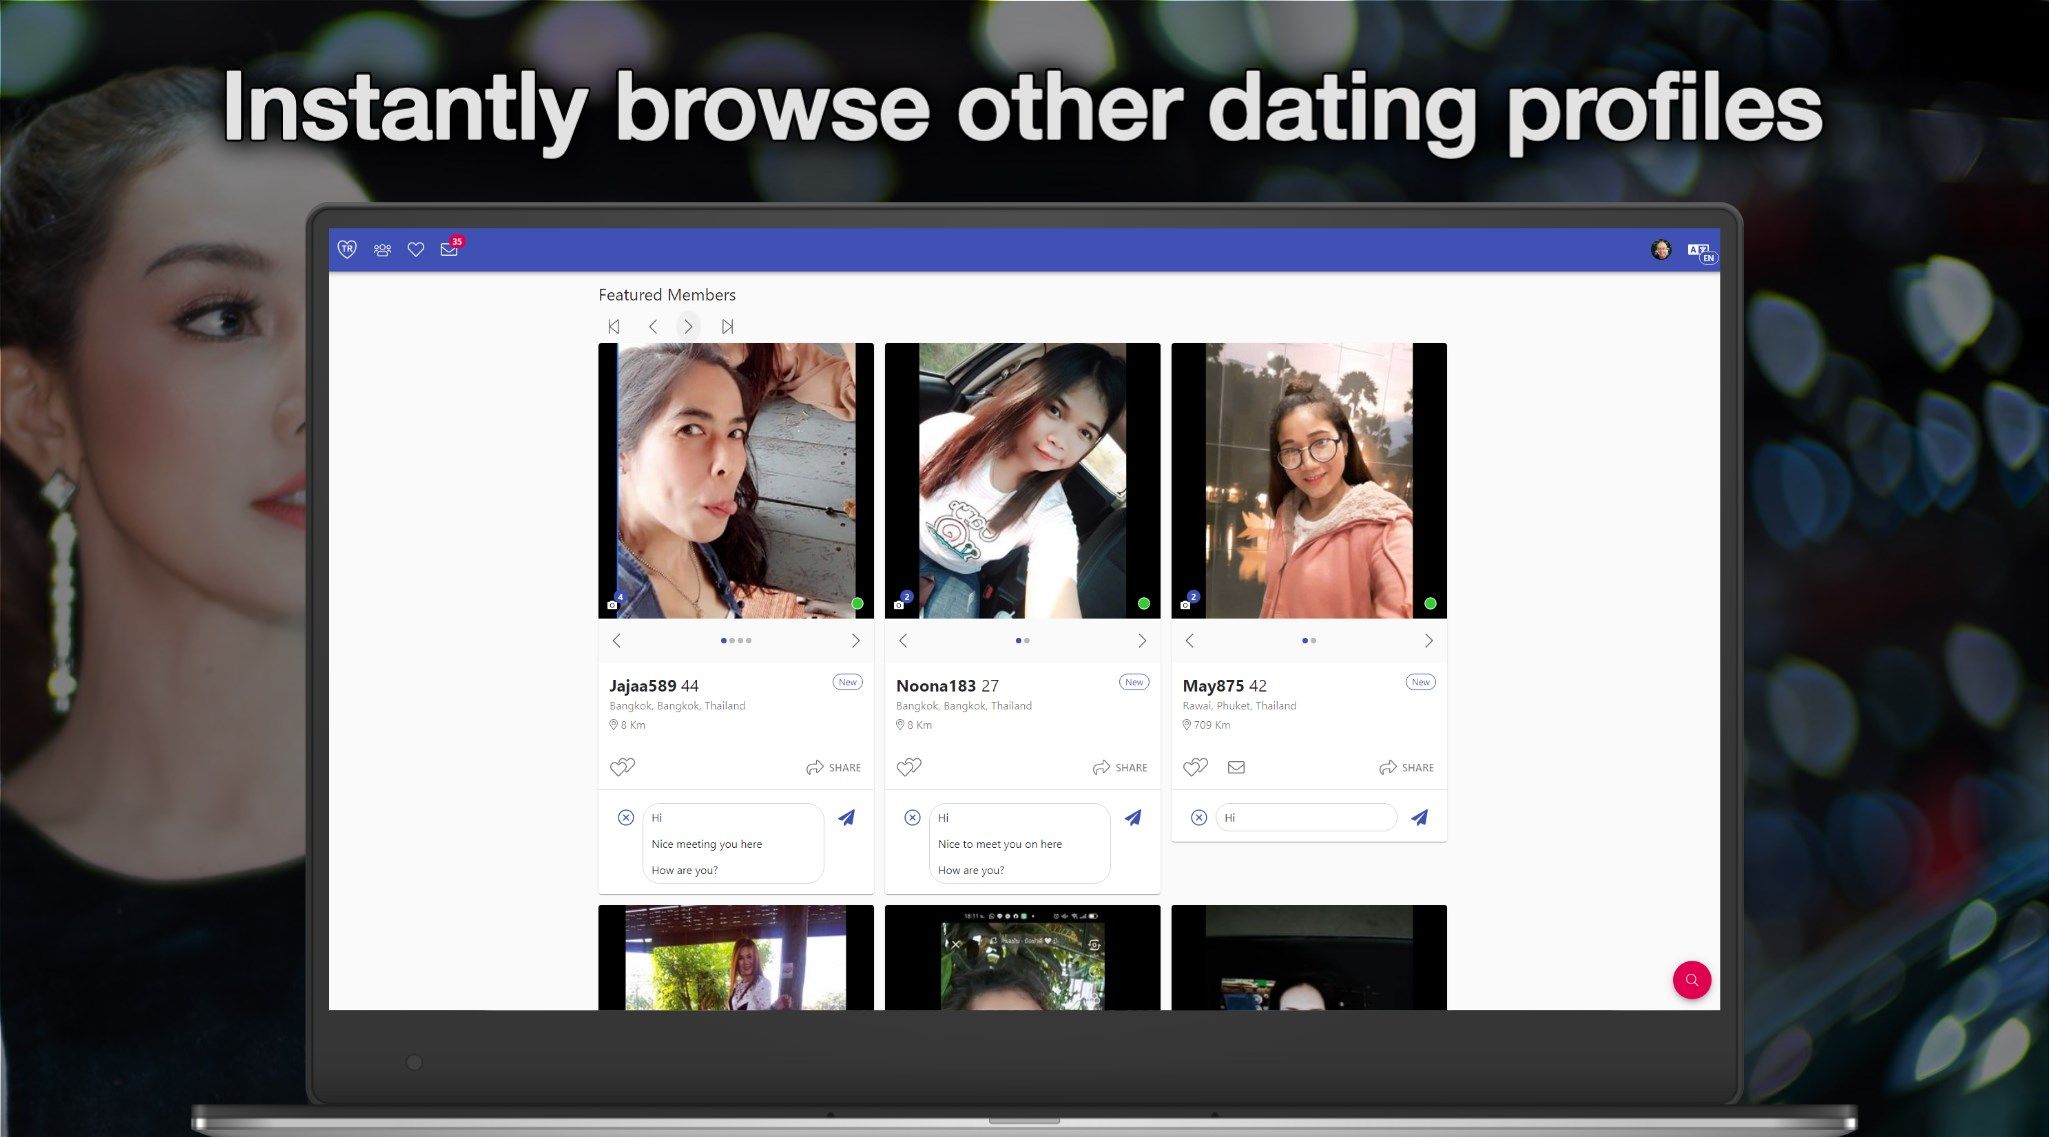 Join and instantly browse other user dating profiles